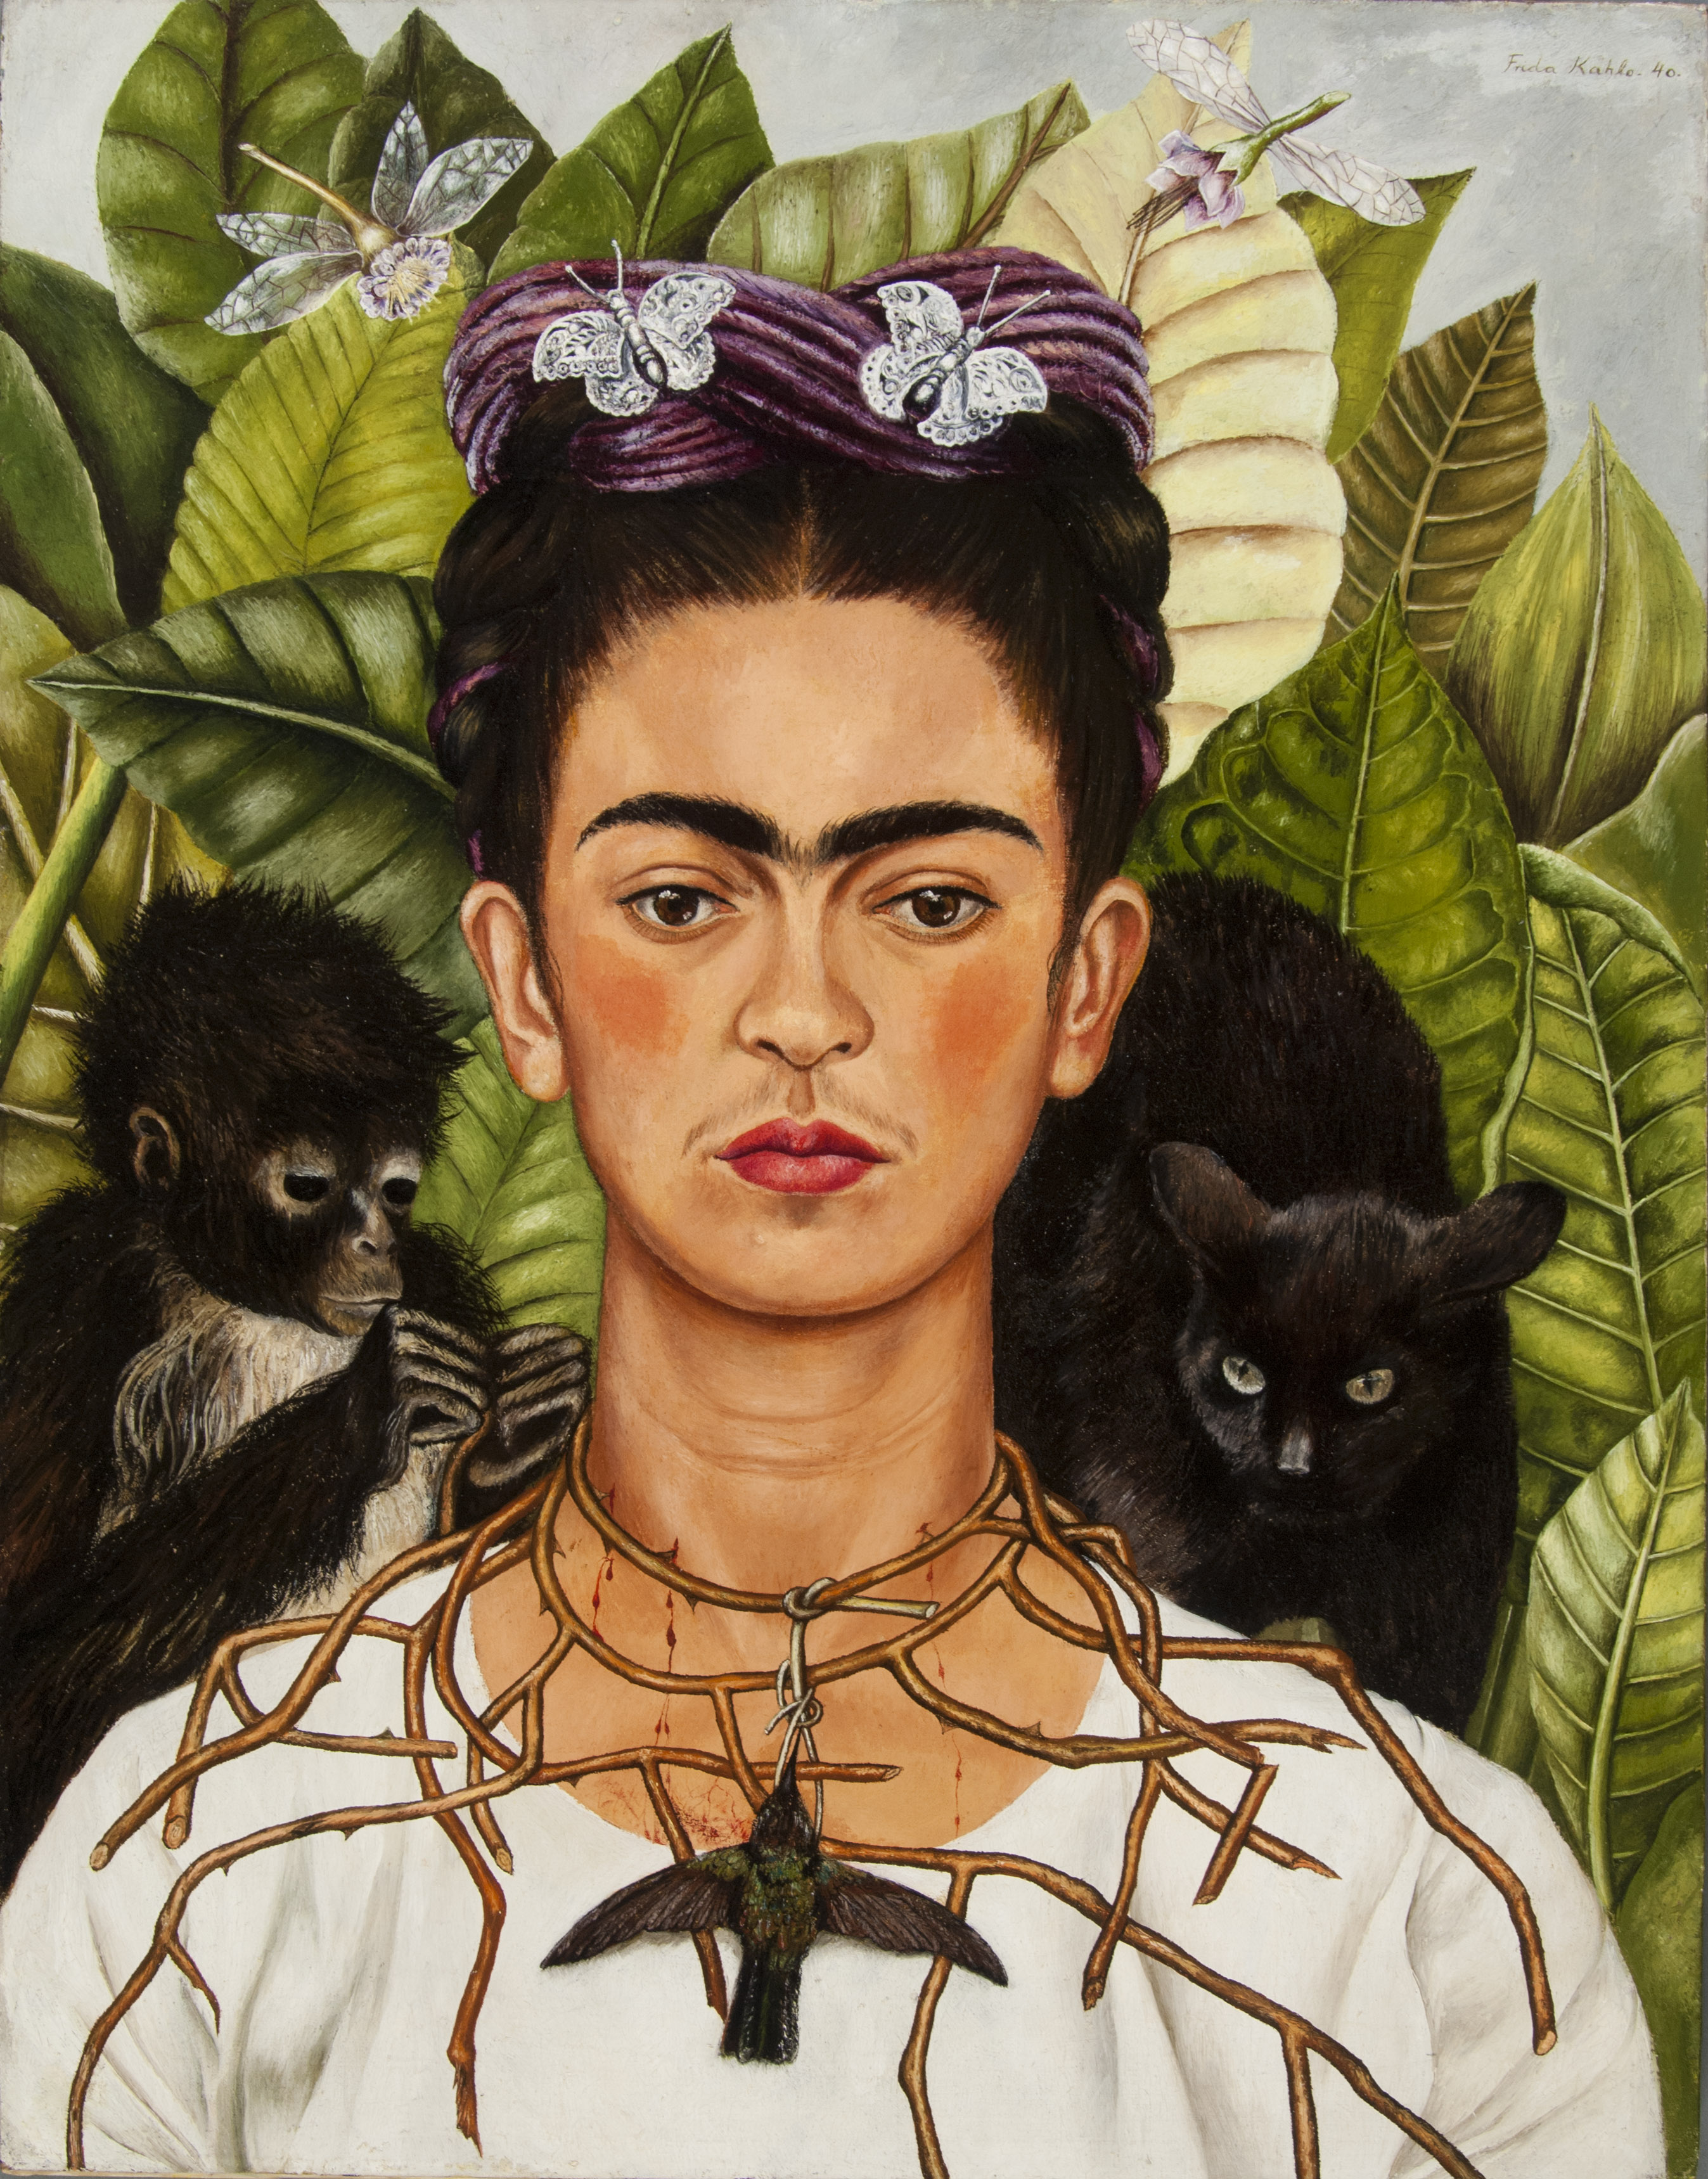 Frida Kahlo, Selbstbildnis mit Dornenhalsband, 1940, Oil on canvas mounted to board, Collection of Harry Ransom Center, The University of Texas at Austin, Nickolas Muray Collection of Modern Mexican Art © Banco de México Diego Rivera Frida Kahlo Museums Trust/VG Bild-Kunst, Bonn 2019